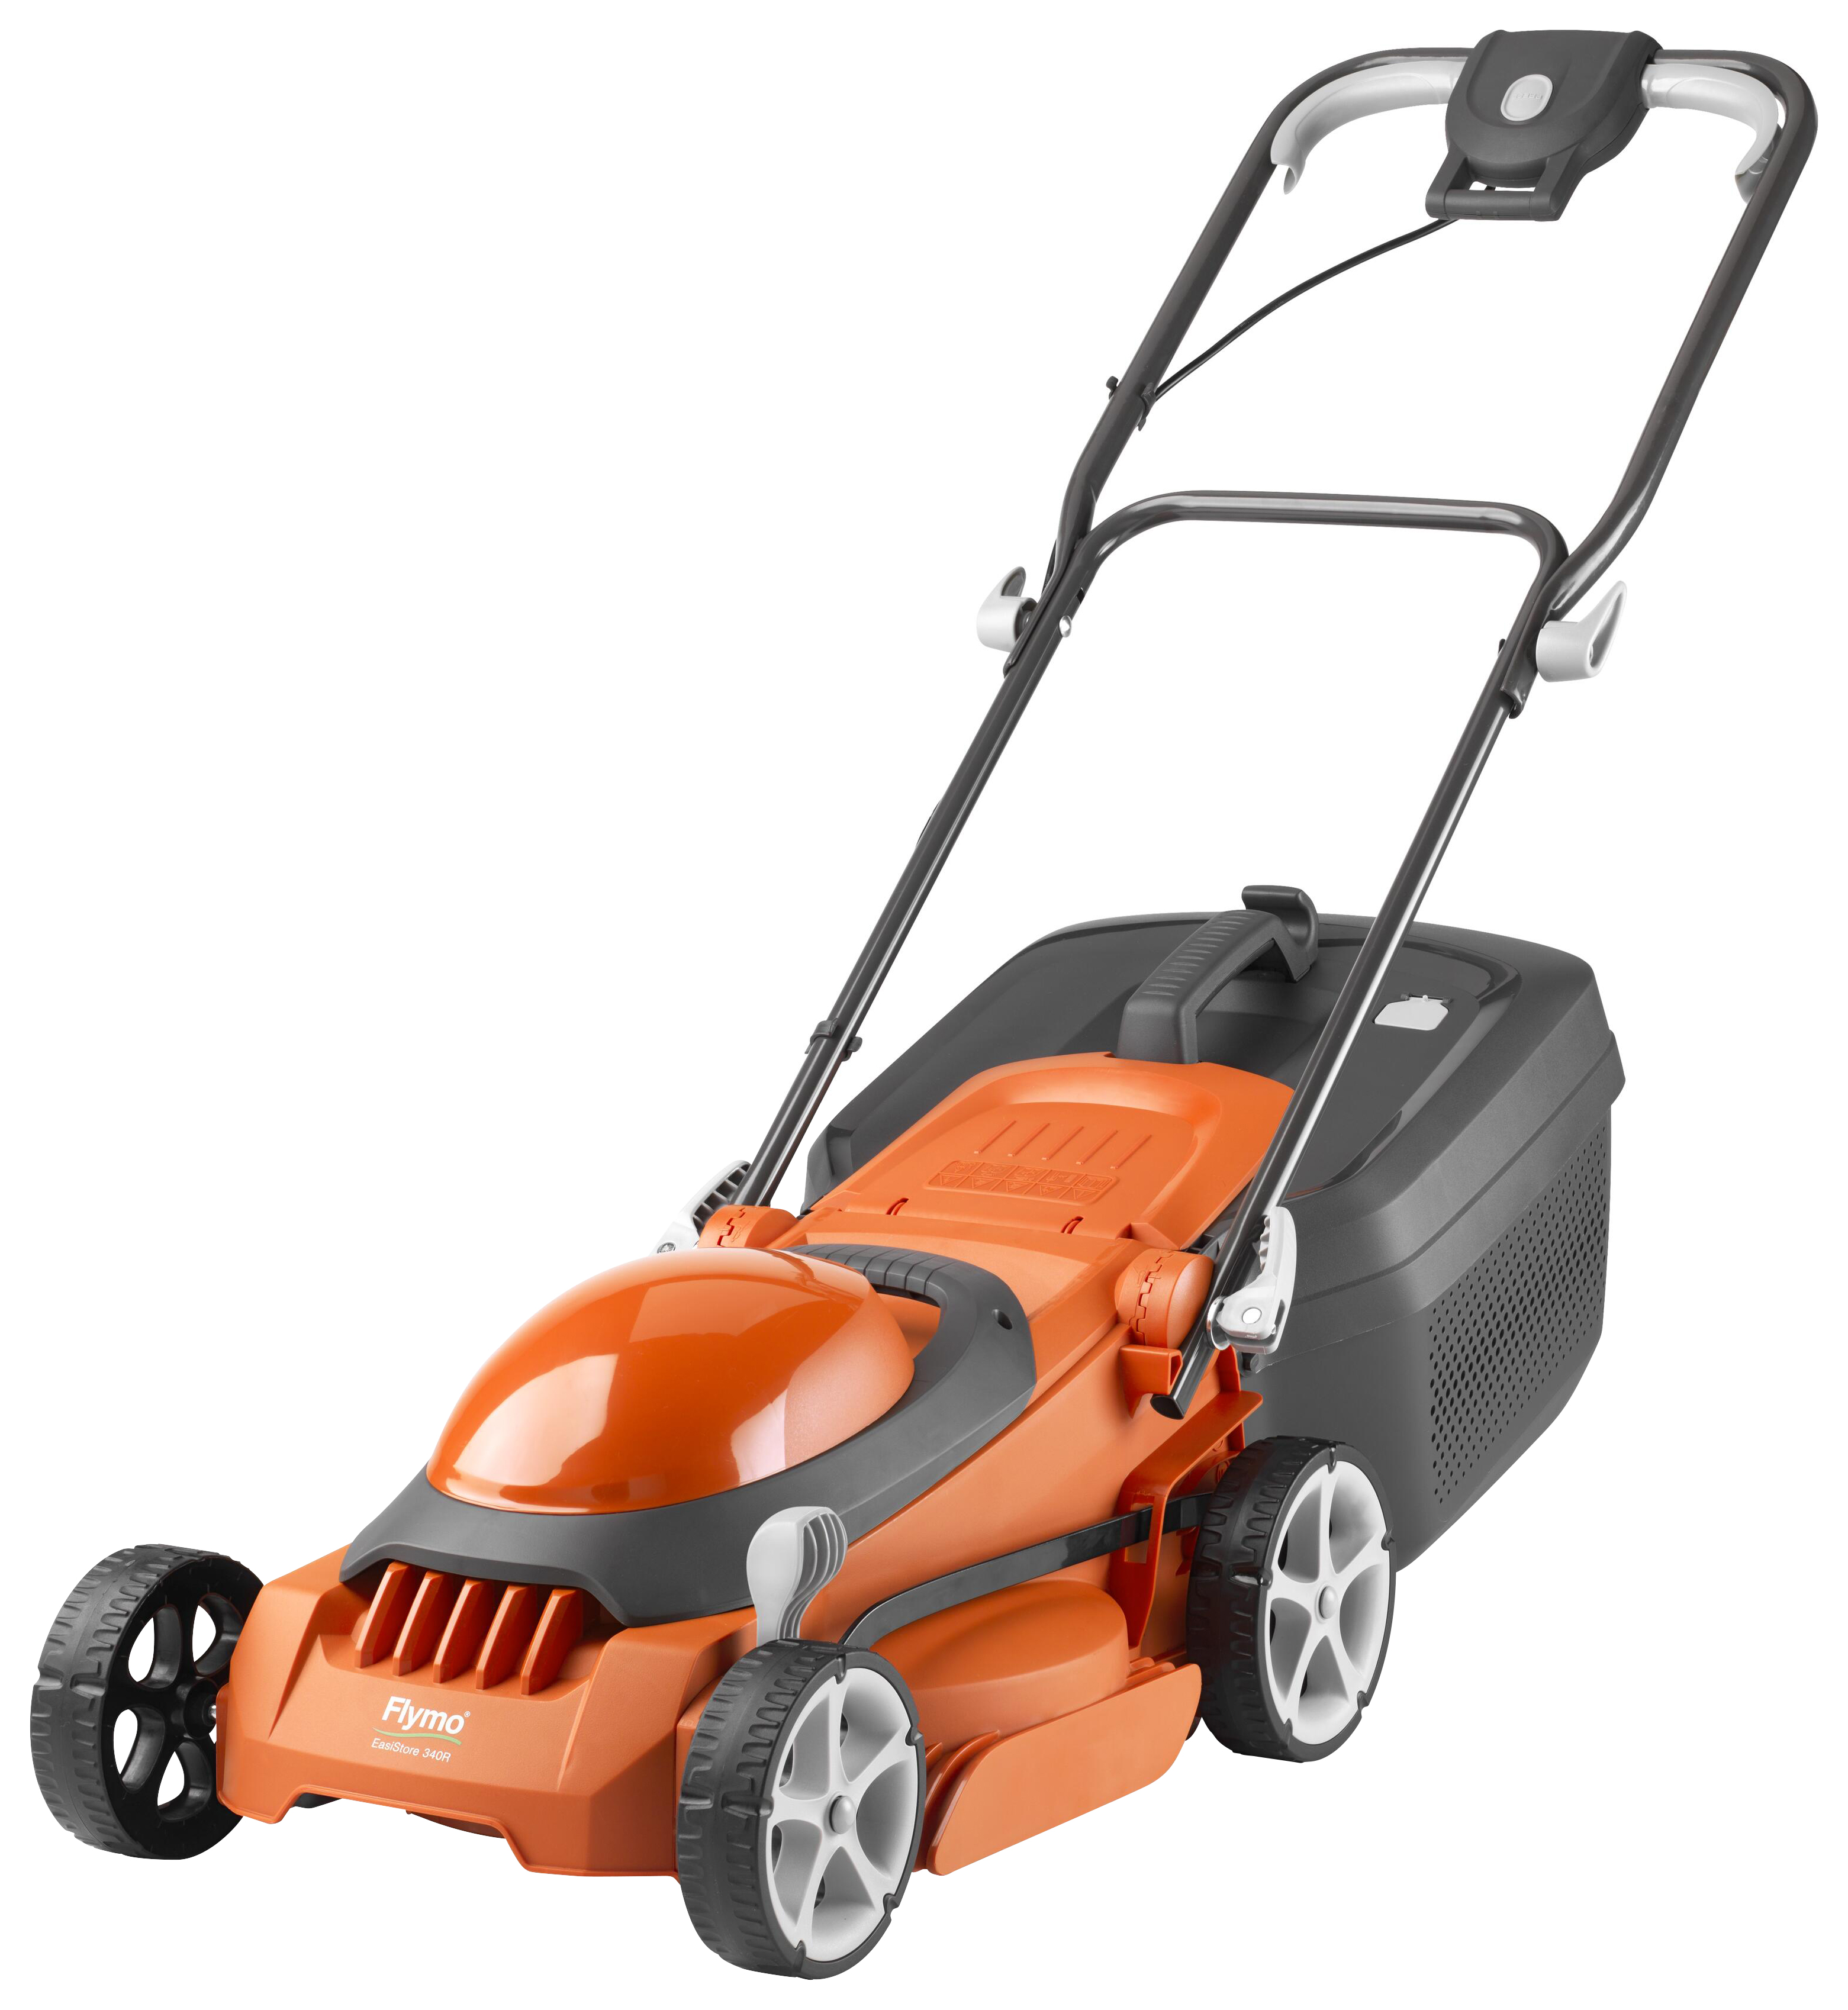 Image of Flymo EasiStore 340R Corded Rotary Lawnmower - 1400W